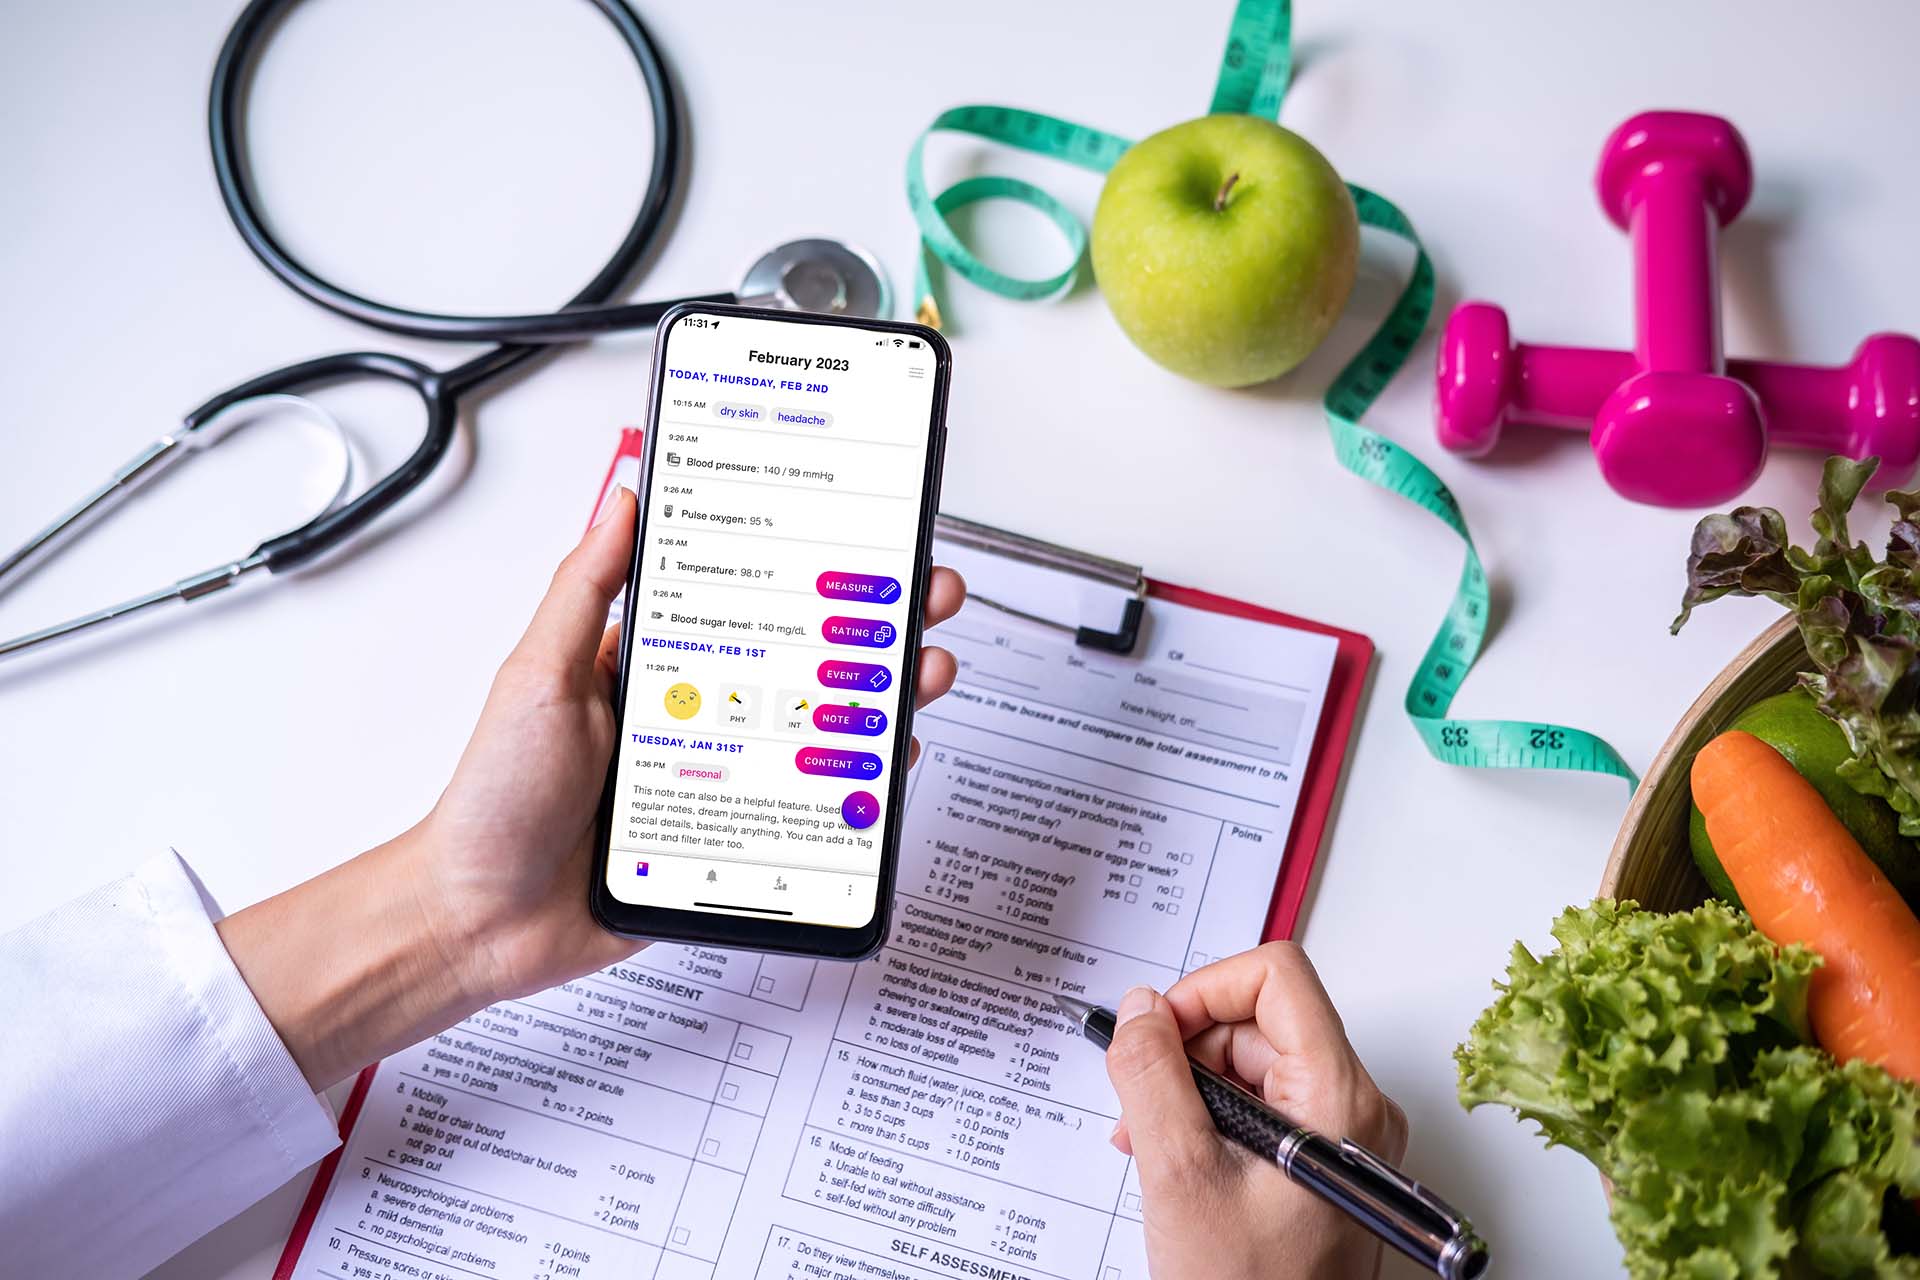 a symptom diary or patient log can help physicians identify underlying triggers and associated symptoms